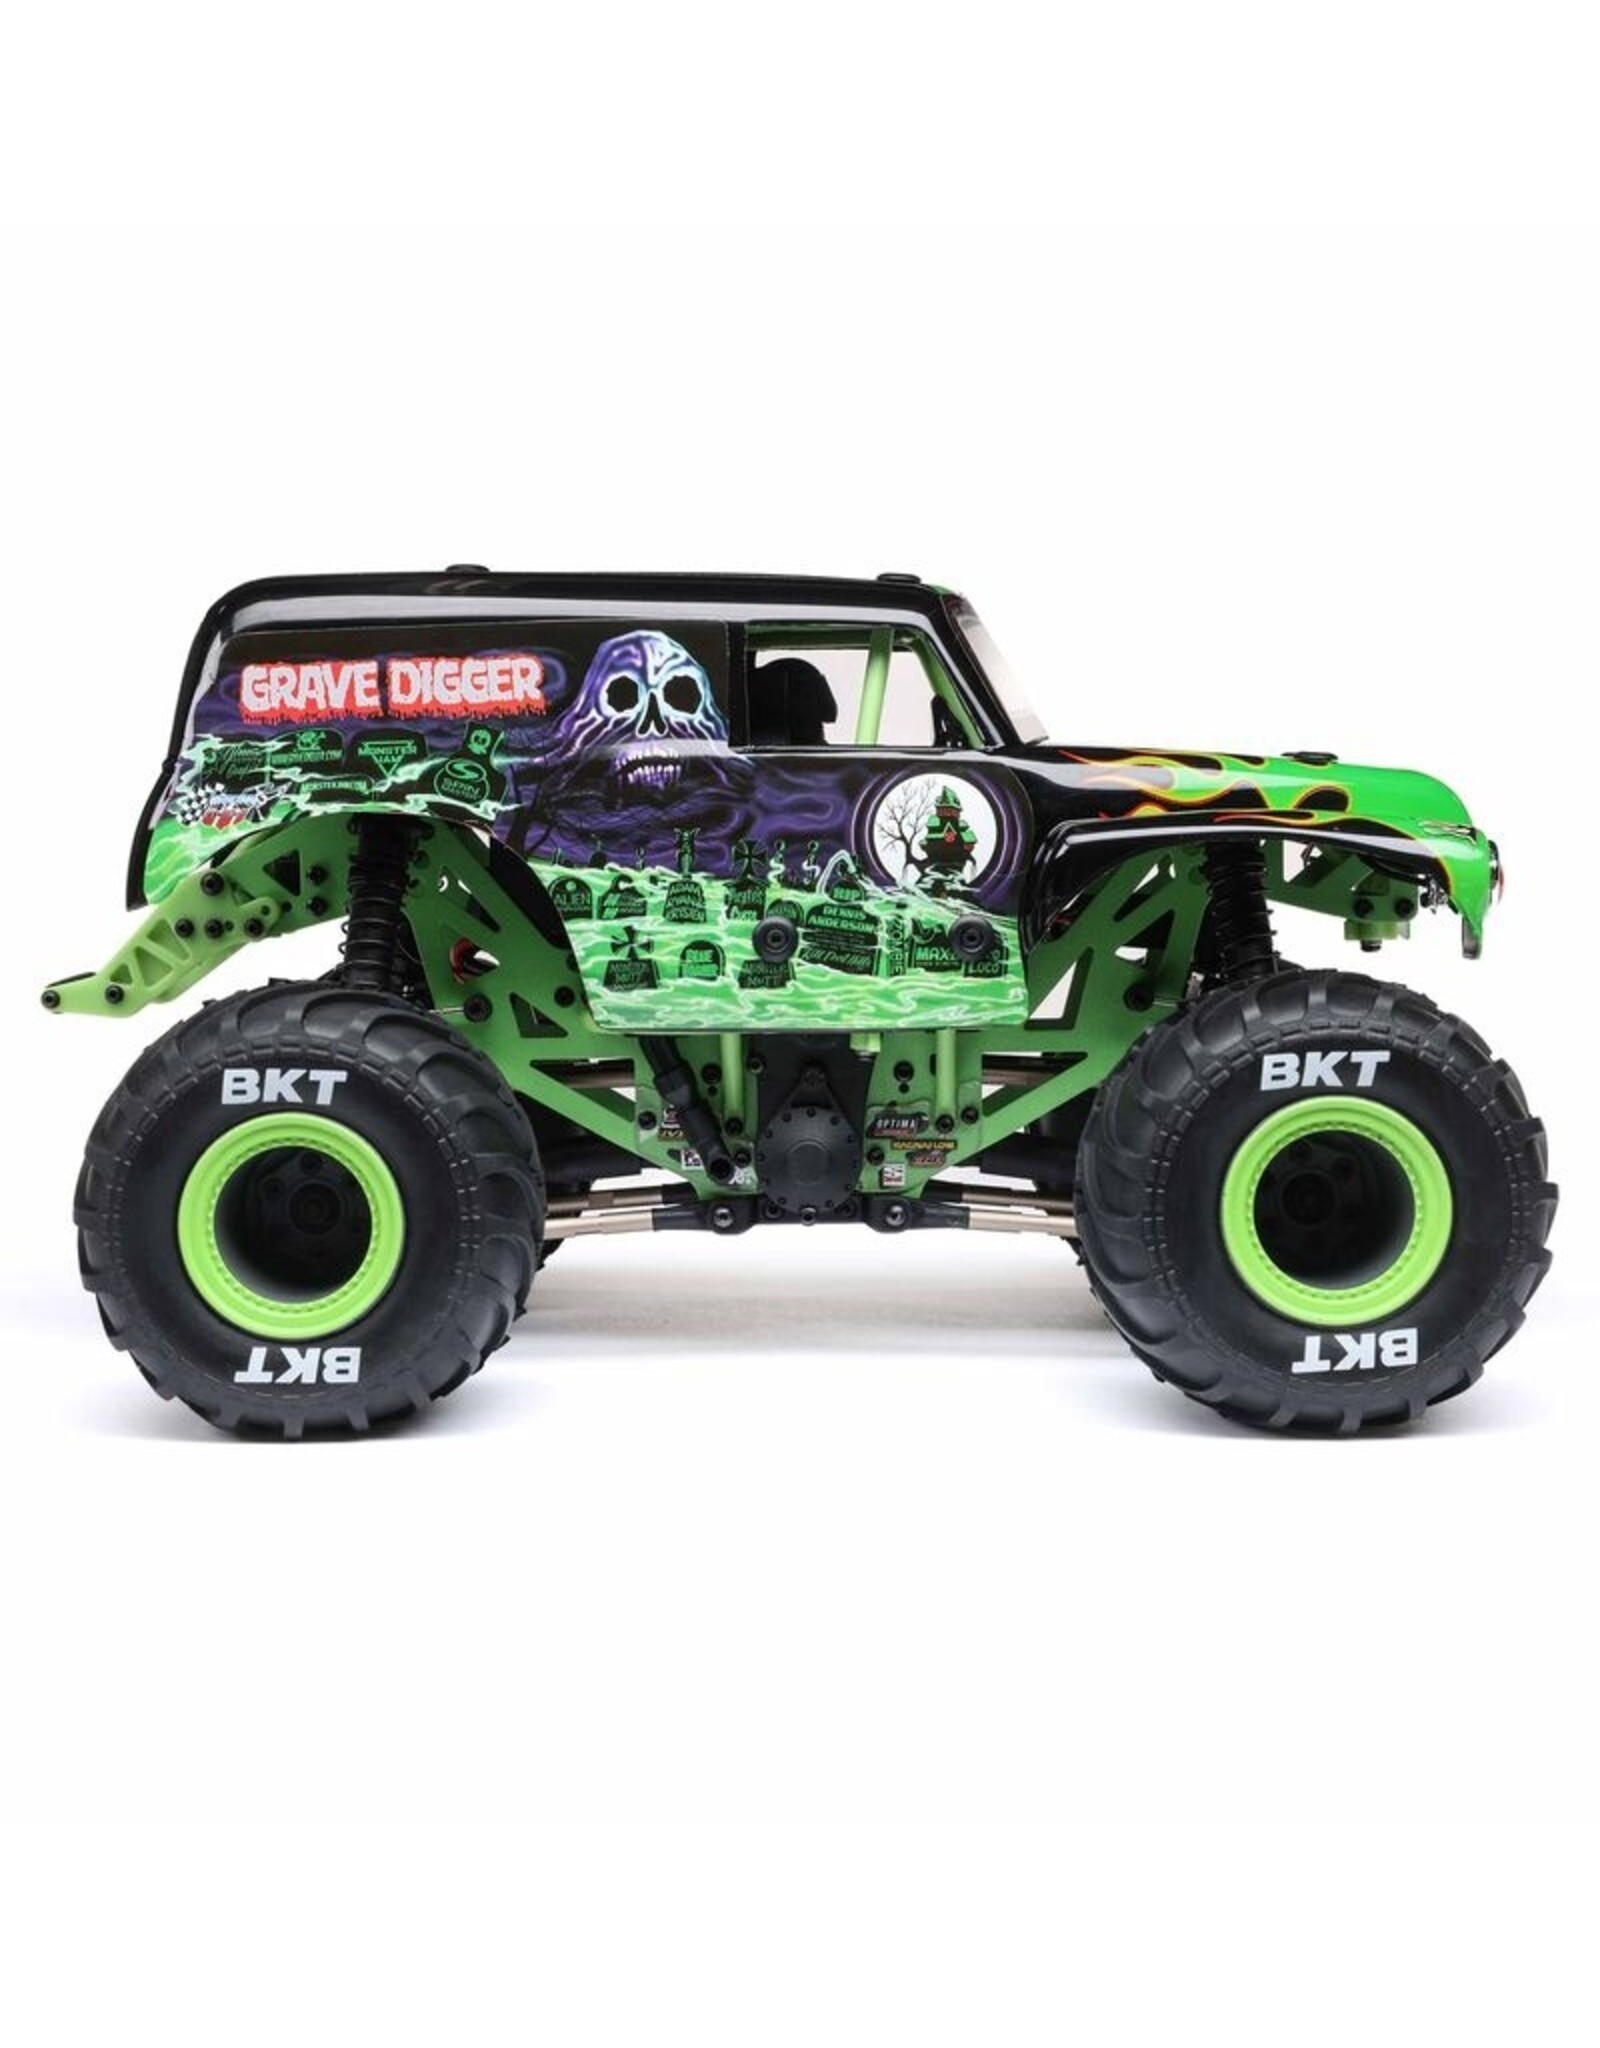 Losi LOS01026T1 1/18 Mini LMT 4WD Grave Digger Monster Truck Brushed RTR